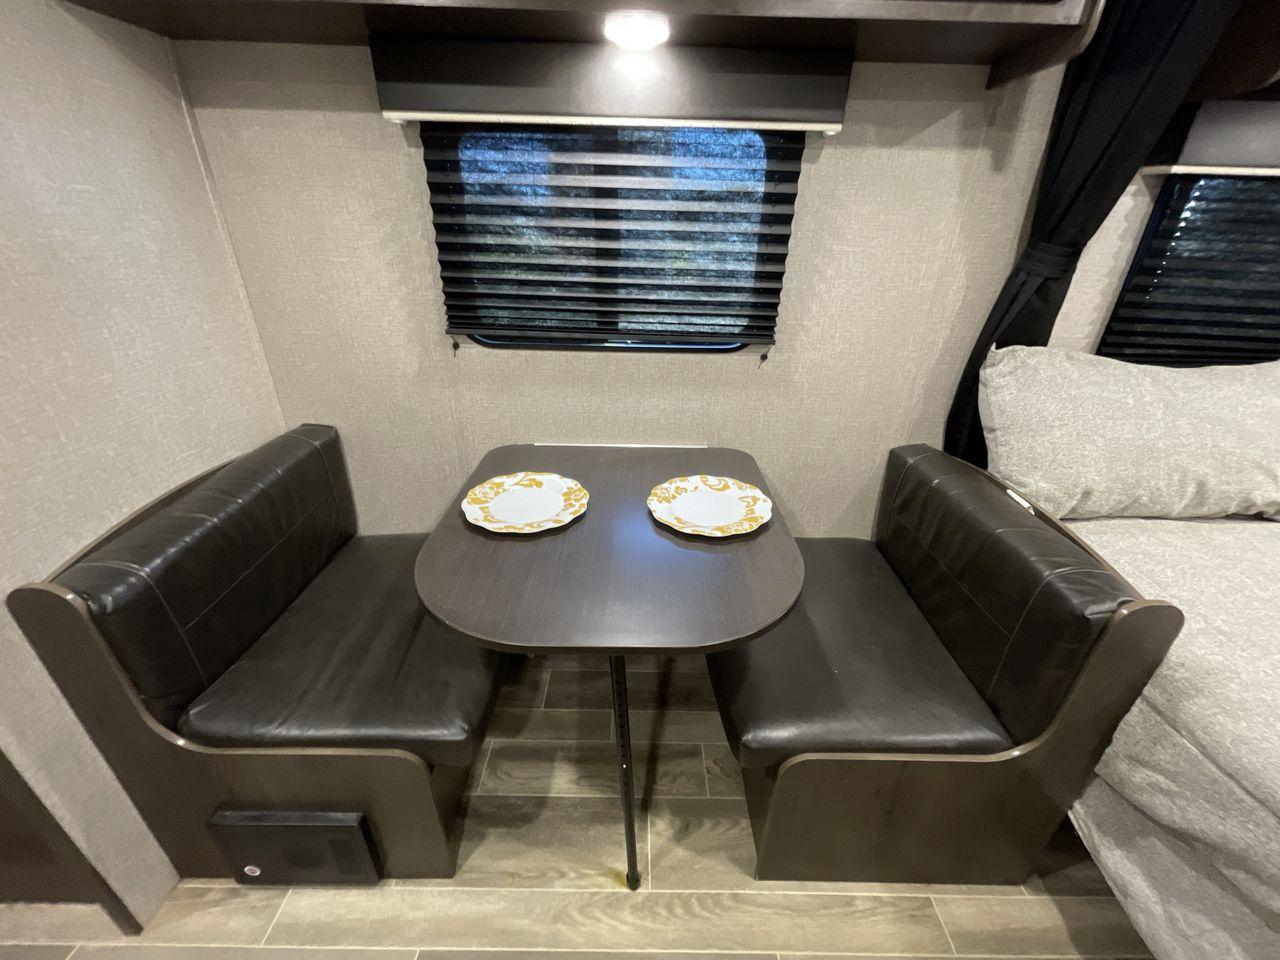 2021 JAYCO JAY FLIGHT SLX 174BH (1UJBJ0AJ1M1) , Length: 21.67 ft | Dry Weight: 3,075 lbs | GVWR: 3,950 lbs | Slides: 0 transmission, located at 4319 N Main Street, Cleburne, TX, 76033, (817) 221-0660, 32.435829, -97.384178 - Take the 2021 Jayco Jay Flight SLX 174BH travel trailer out on your camping adventures. This lightweight and small RV is ideal for people looking for an affordable and cozy way to enjoy the great outdoors. The dimensions of this unit are 21.67 ft in length, 7.08 ft in width, and 9.17 ft in height. I - Photo #12